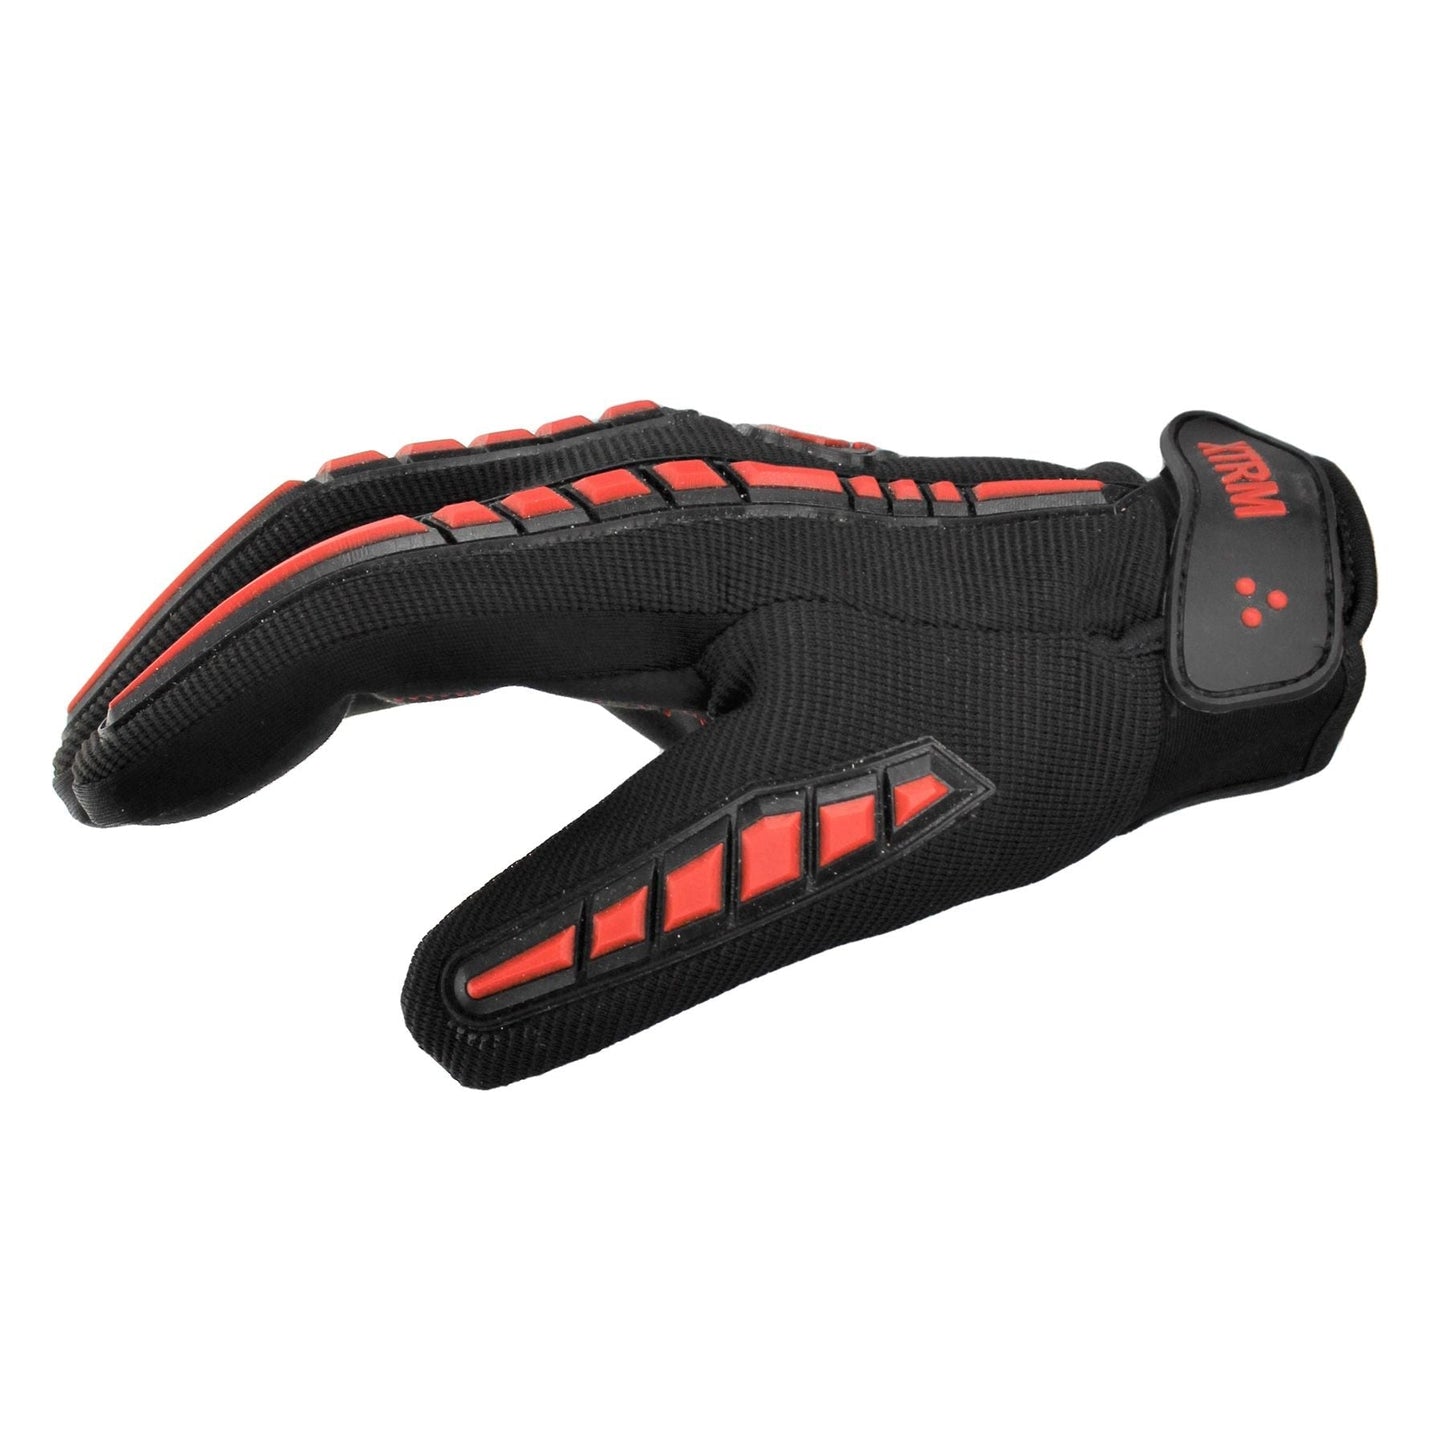 XTRM ADULT RIDE MOTOCROSS GLOVES - RED